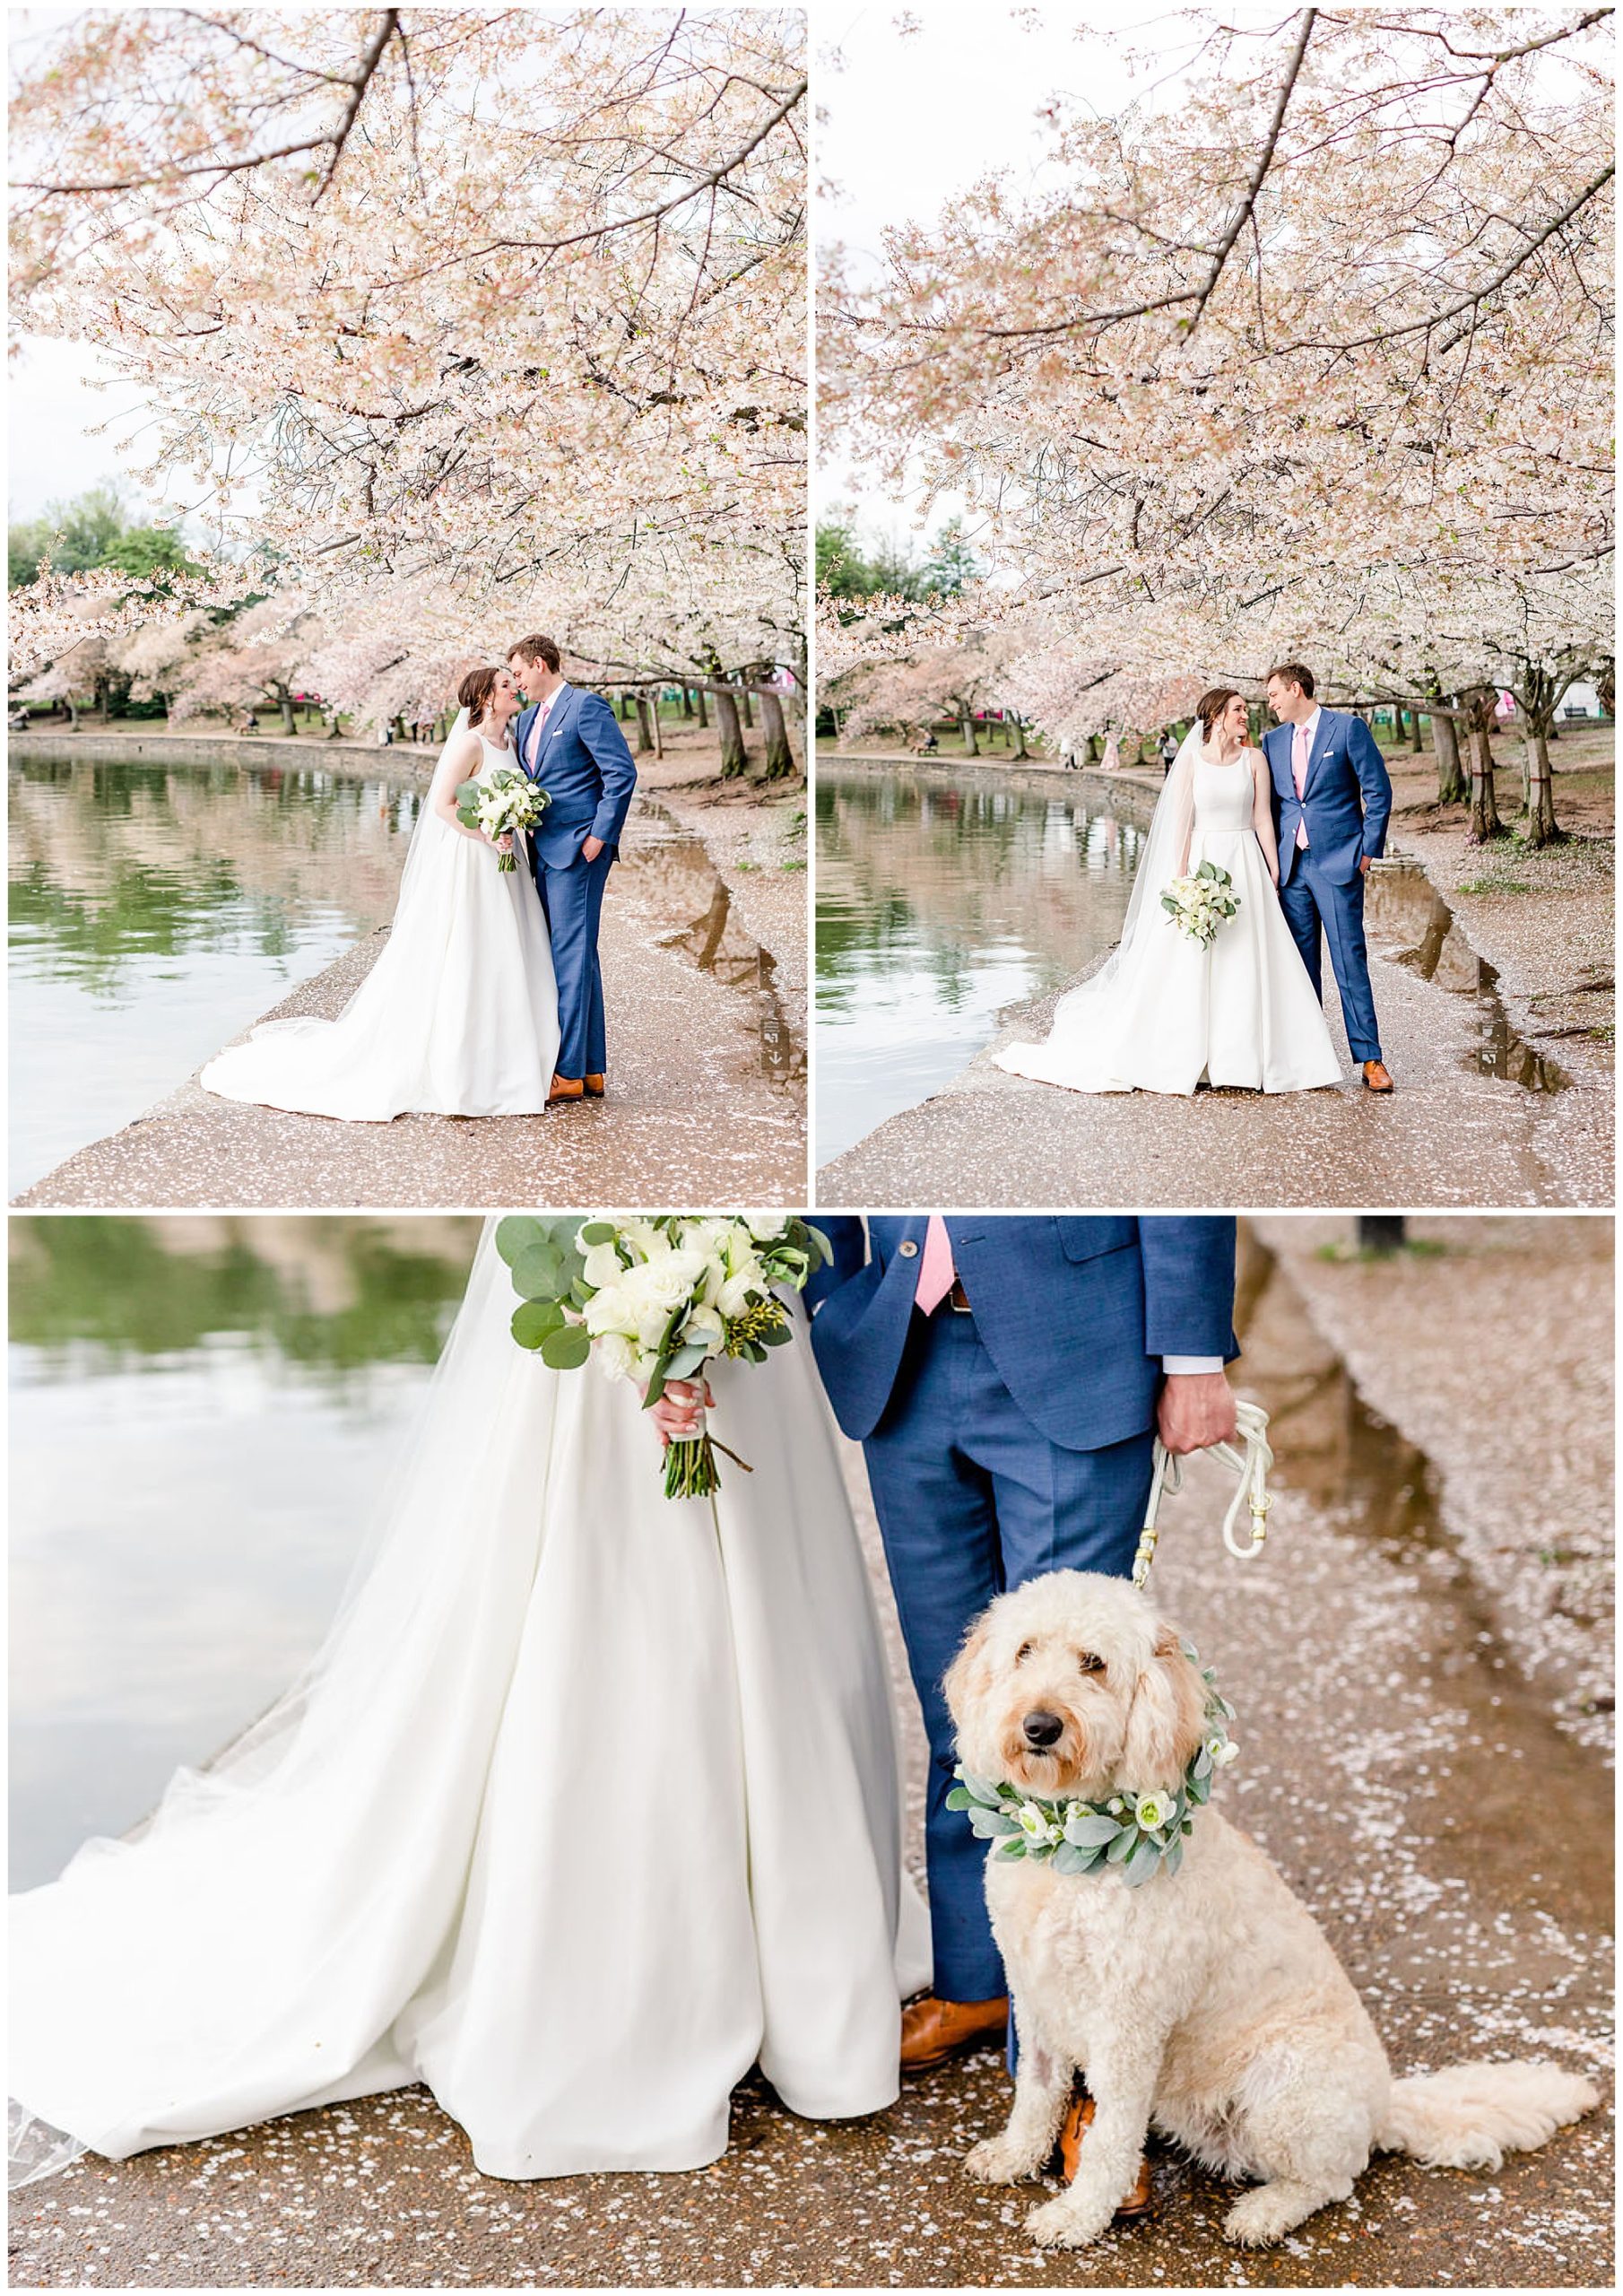 DC cherry blossoms wedding portraits, DC elopement portraits, DC wedding photos, DC wedding photographer, cherry blossoms wedding photos, DC cherry blossoms photographer, Rachel E.H. Photography, couple with dog